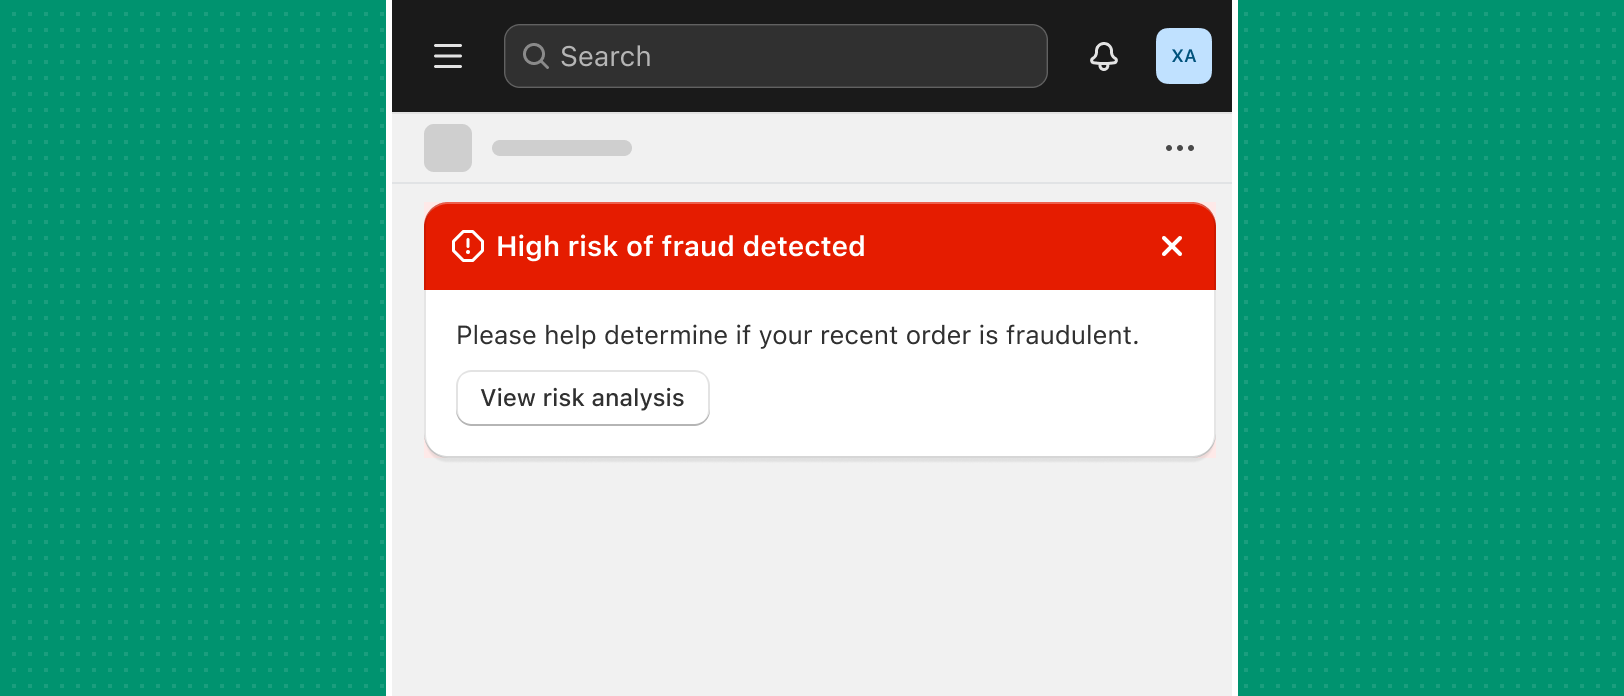 A dismissible error banner in red that reads "High risk of fraud detected". The banner includes a button that's labeled "View risk analysis".